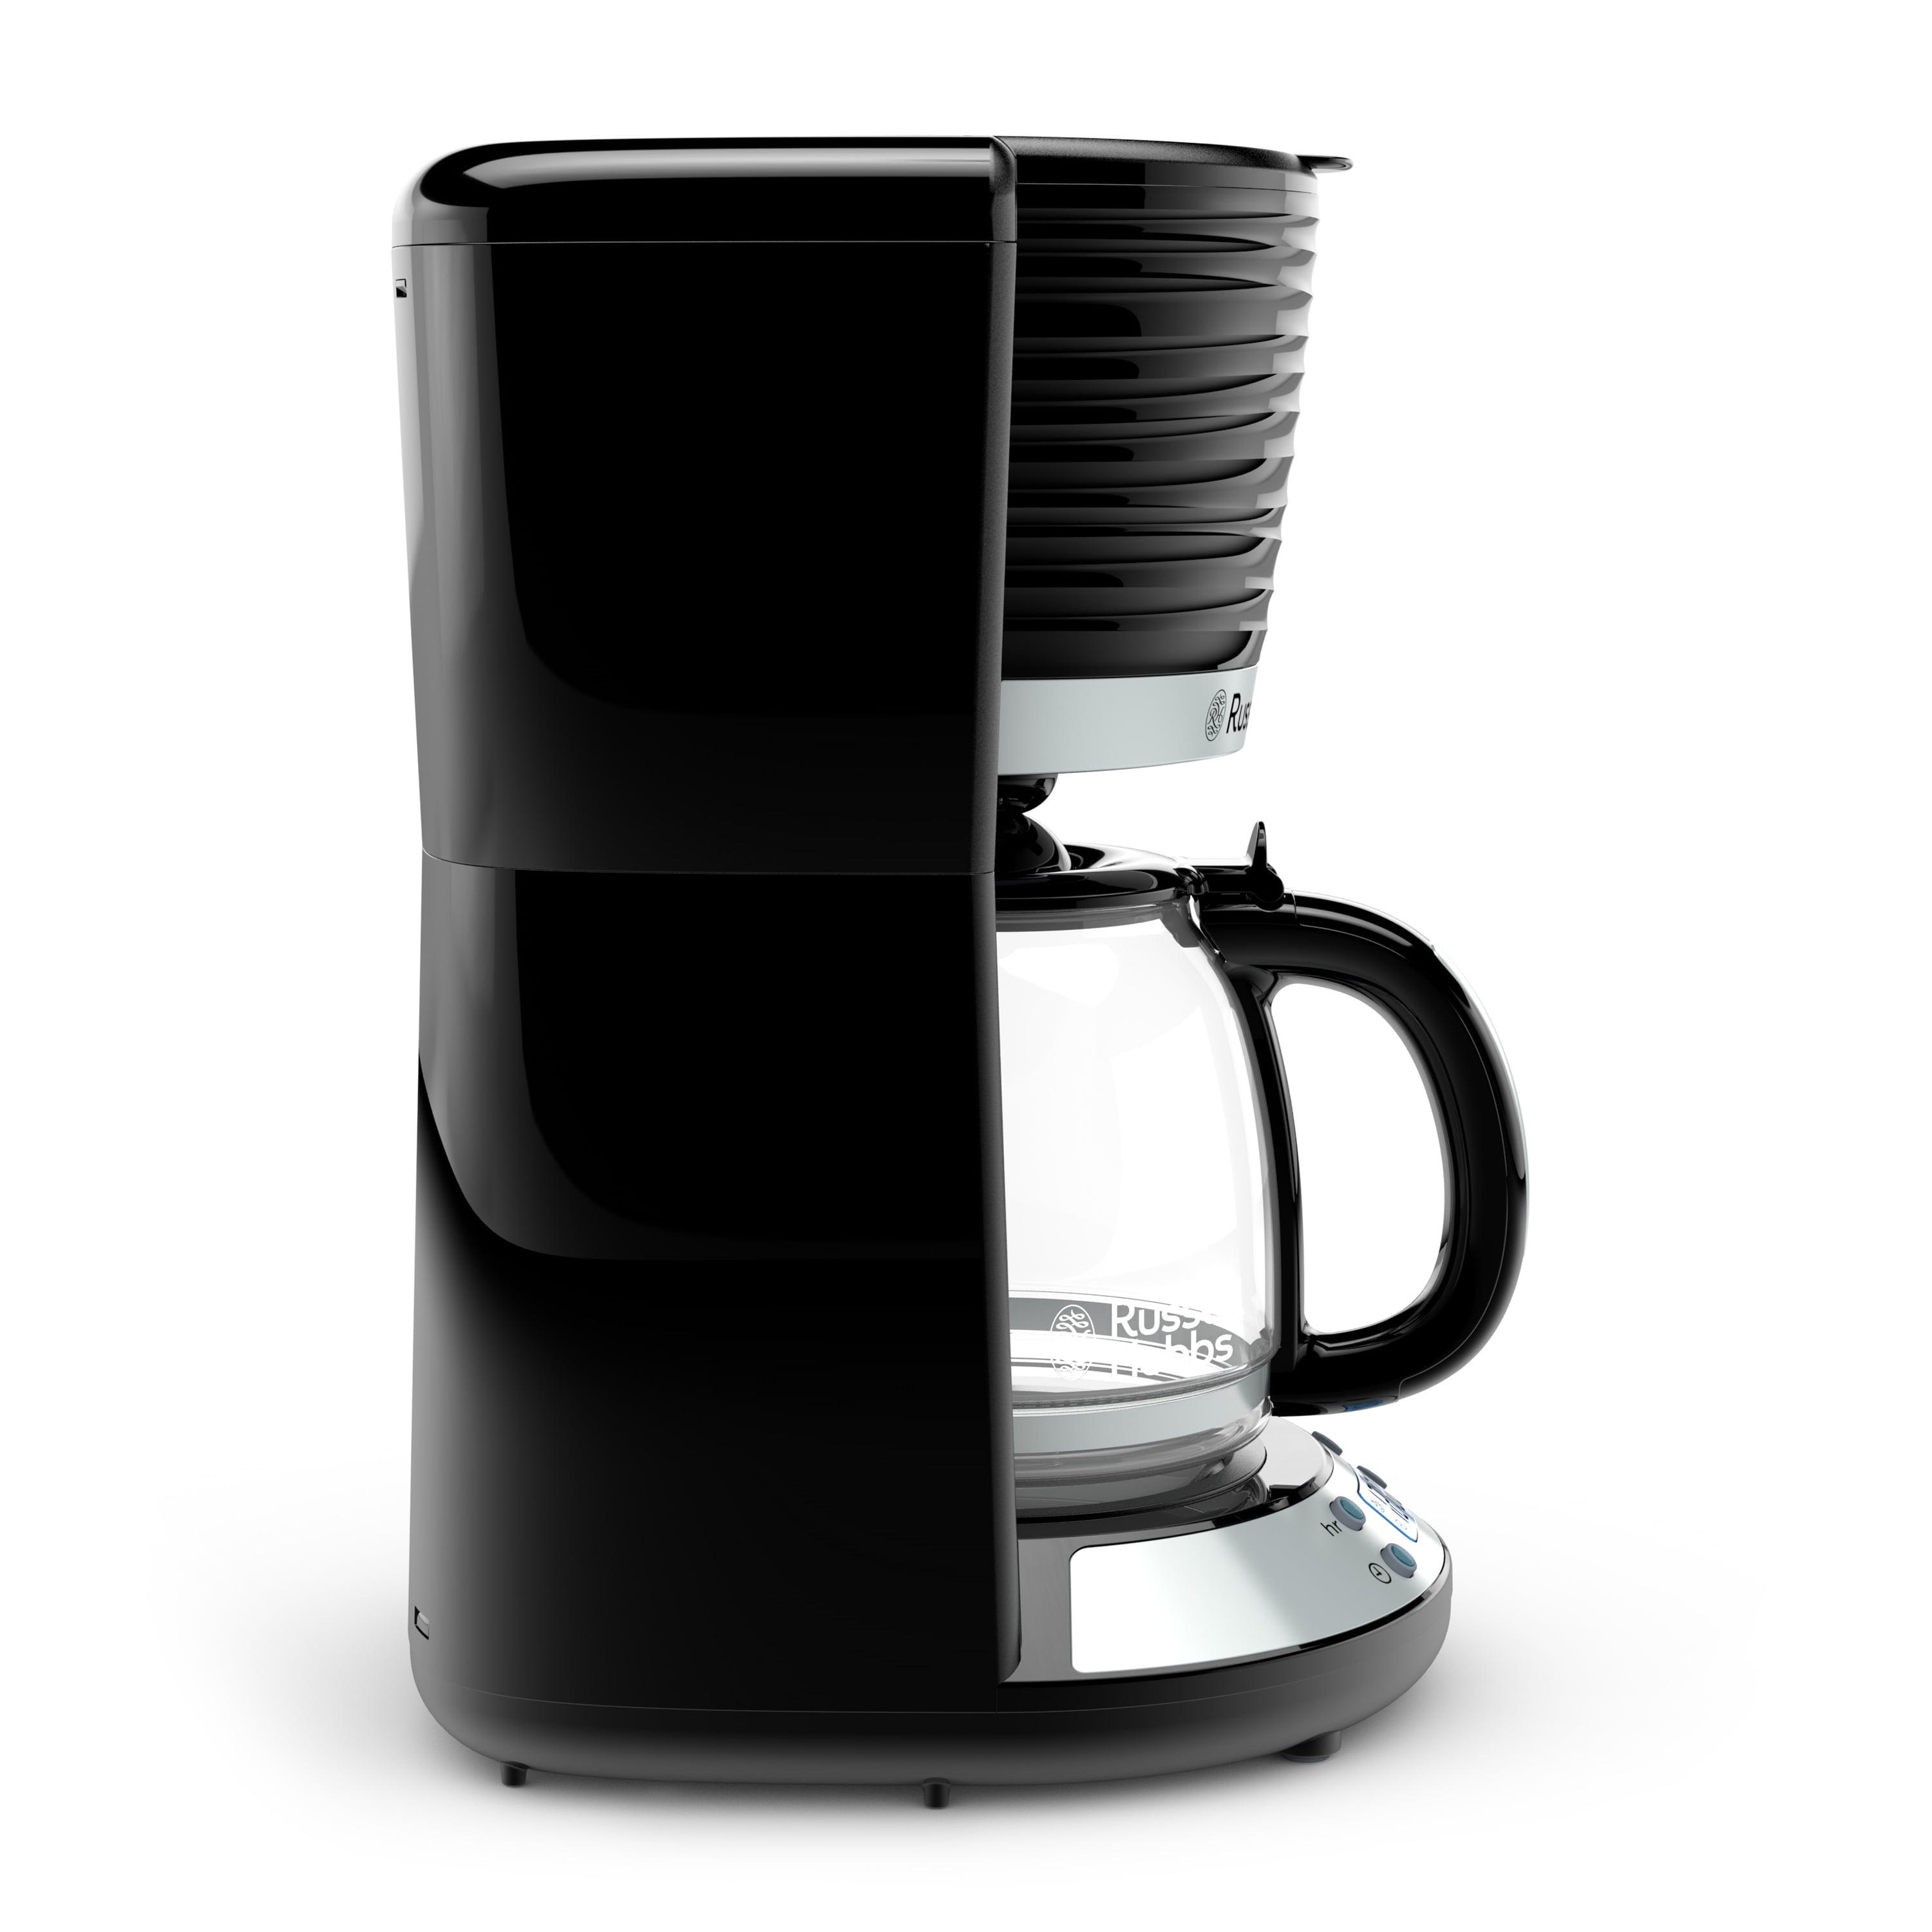 Russell Hobbs Coffee maker 1.25 liter + Free Barista Filtered American  Coffee (454g) –  Lebanon Shopping Buy Online